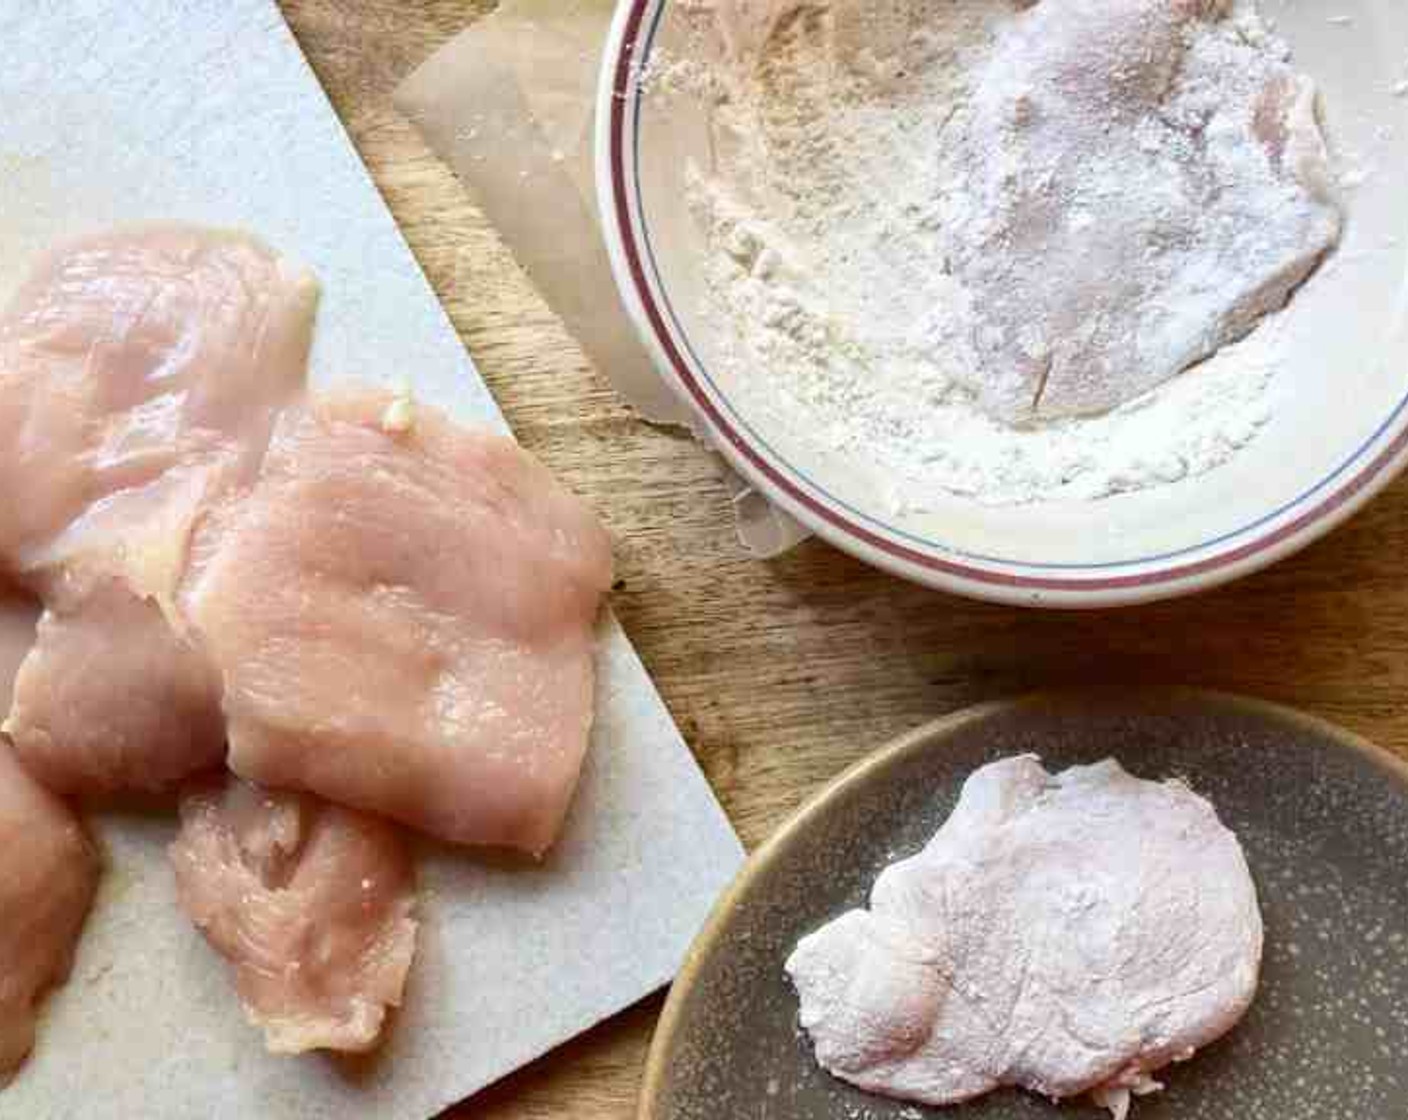 step 6 Dredge each piece of Boneless, Skinless Chicken Breast (1 lb) through the flour turning to coat evenly. Shake any excess flour back into the bowl. Lay the chicken on a plate and repeat.